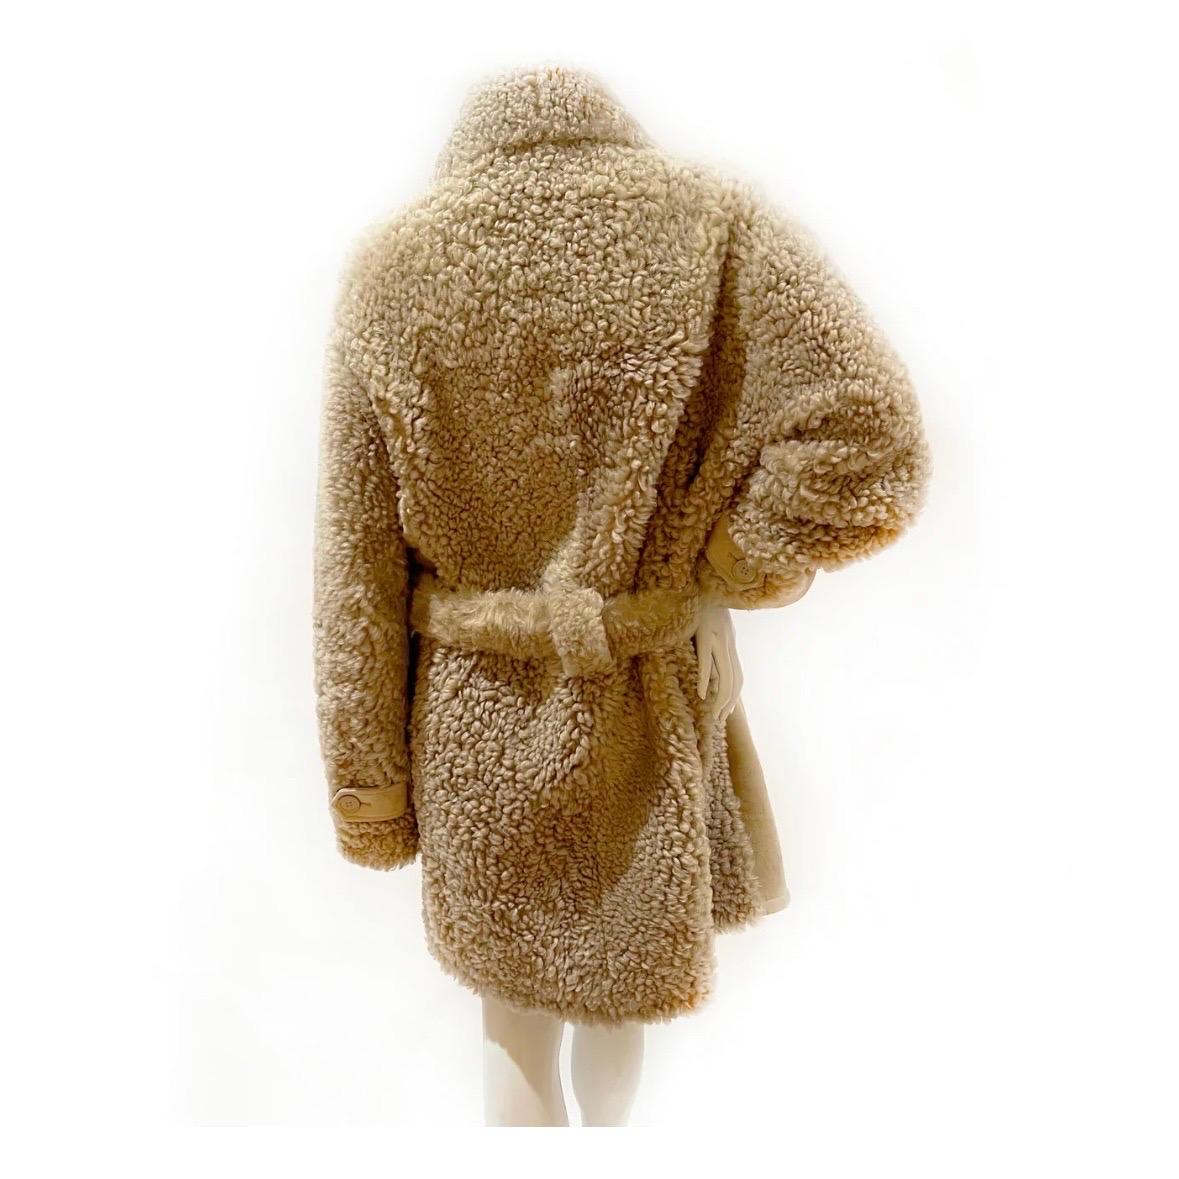 Beige Shearling Coat by Fendi
Winter 2019 (Men's)
Made in Italy
Beige Leather & fur 
Embroidered Fendi Zucca patch on chest 
Fur collar
Front button/zip combination closure 
Dual snap chest pockets  
Dual snap hip pockets
Tie Belt/ belt loops
100%